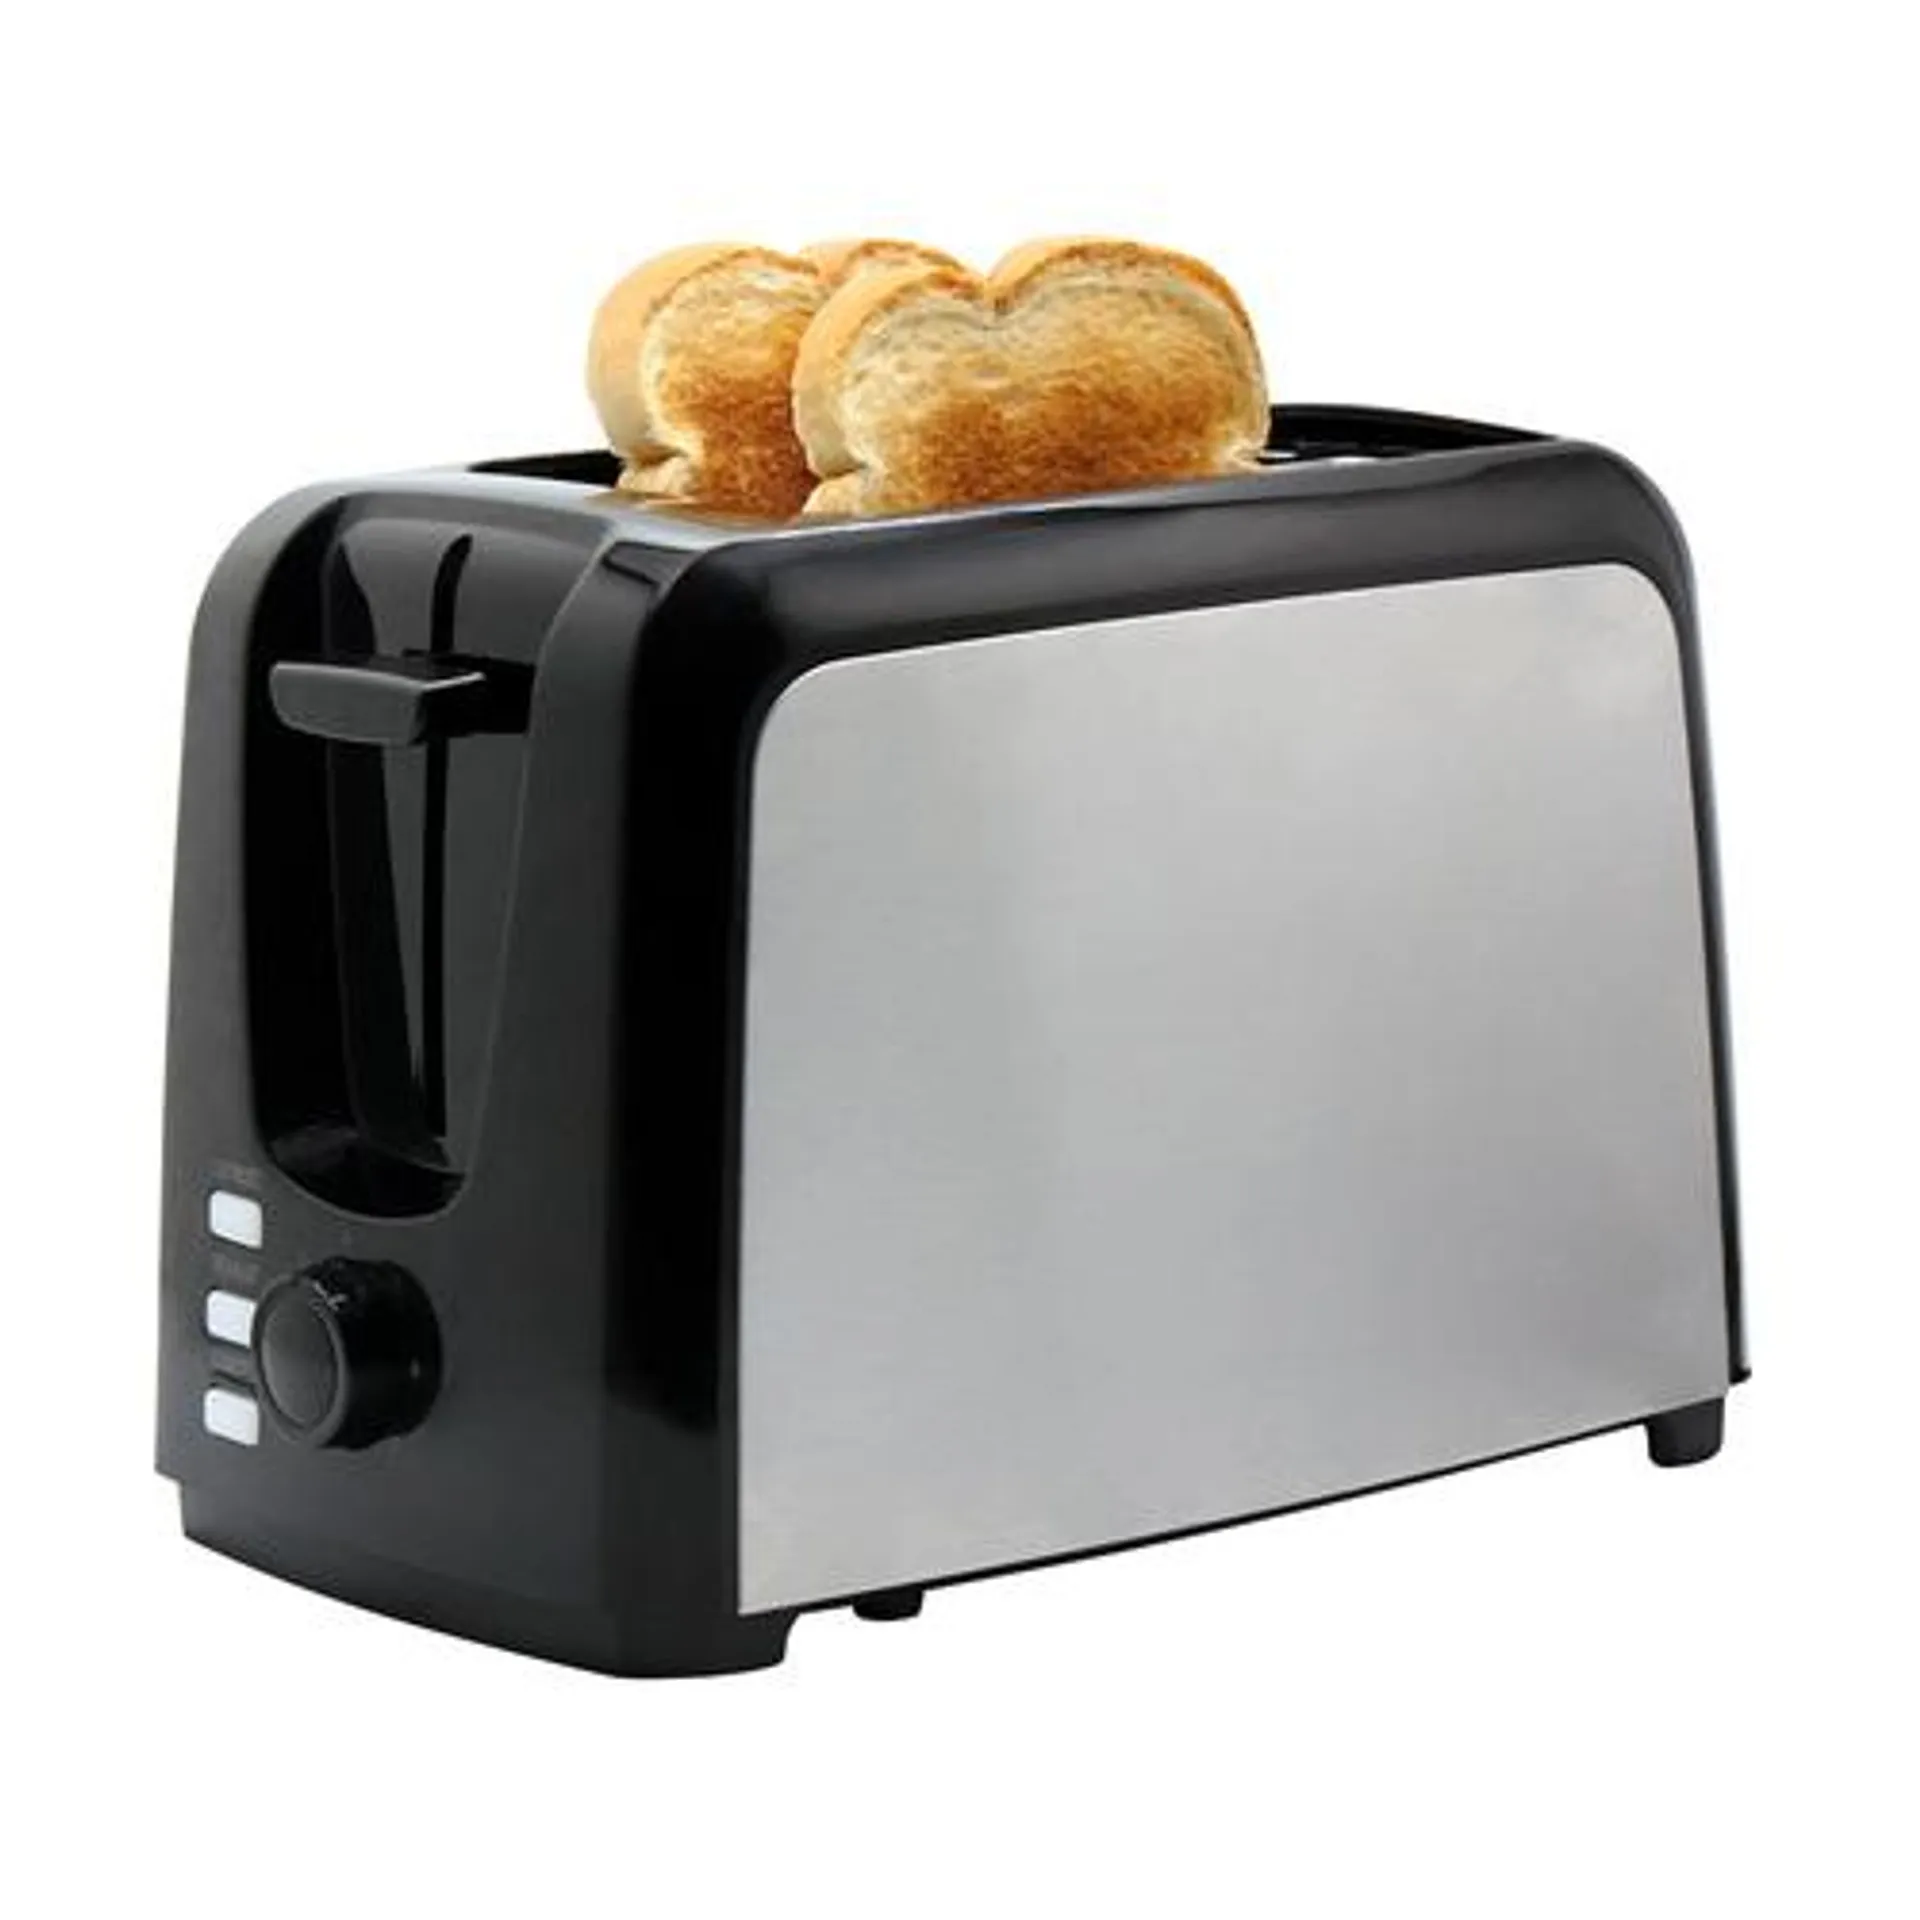 2-Slice 7-Shade Stainless Steel Toaster with Reheat, Defrost and Cancel Functions in Black